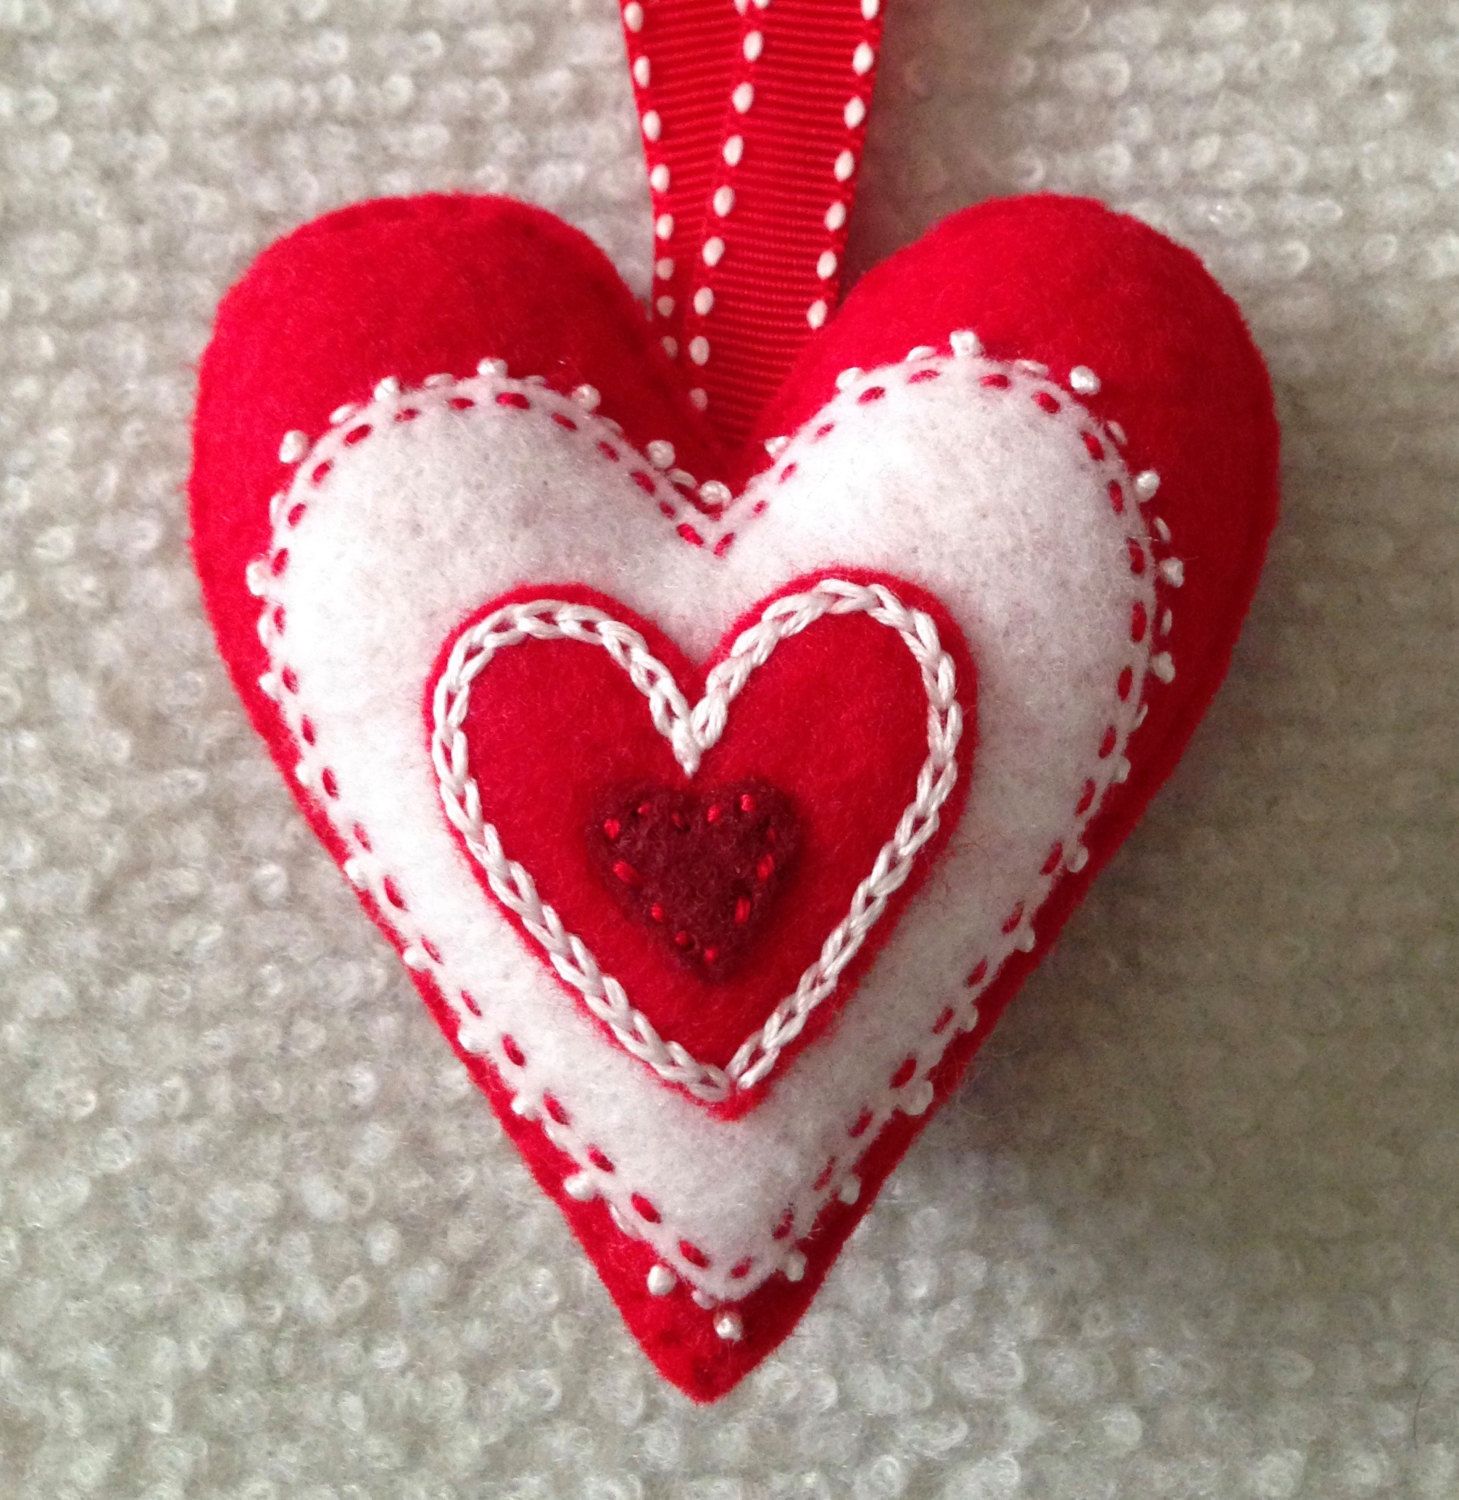 Red heart ornament red and white embroidered heart | Heart ornament ...